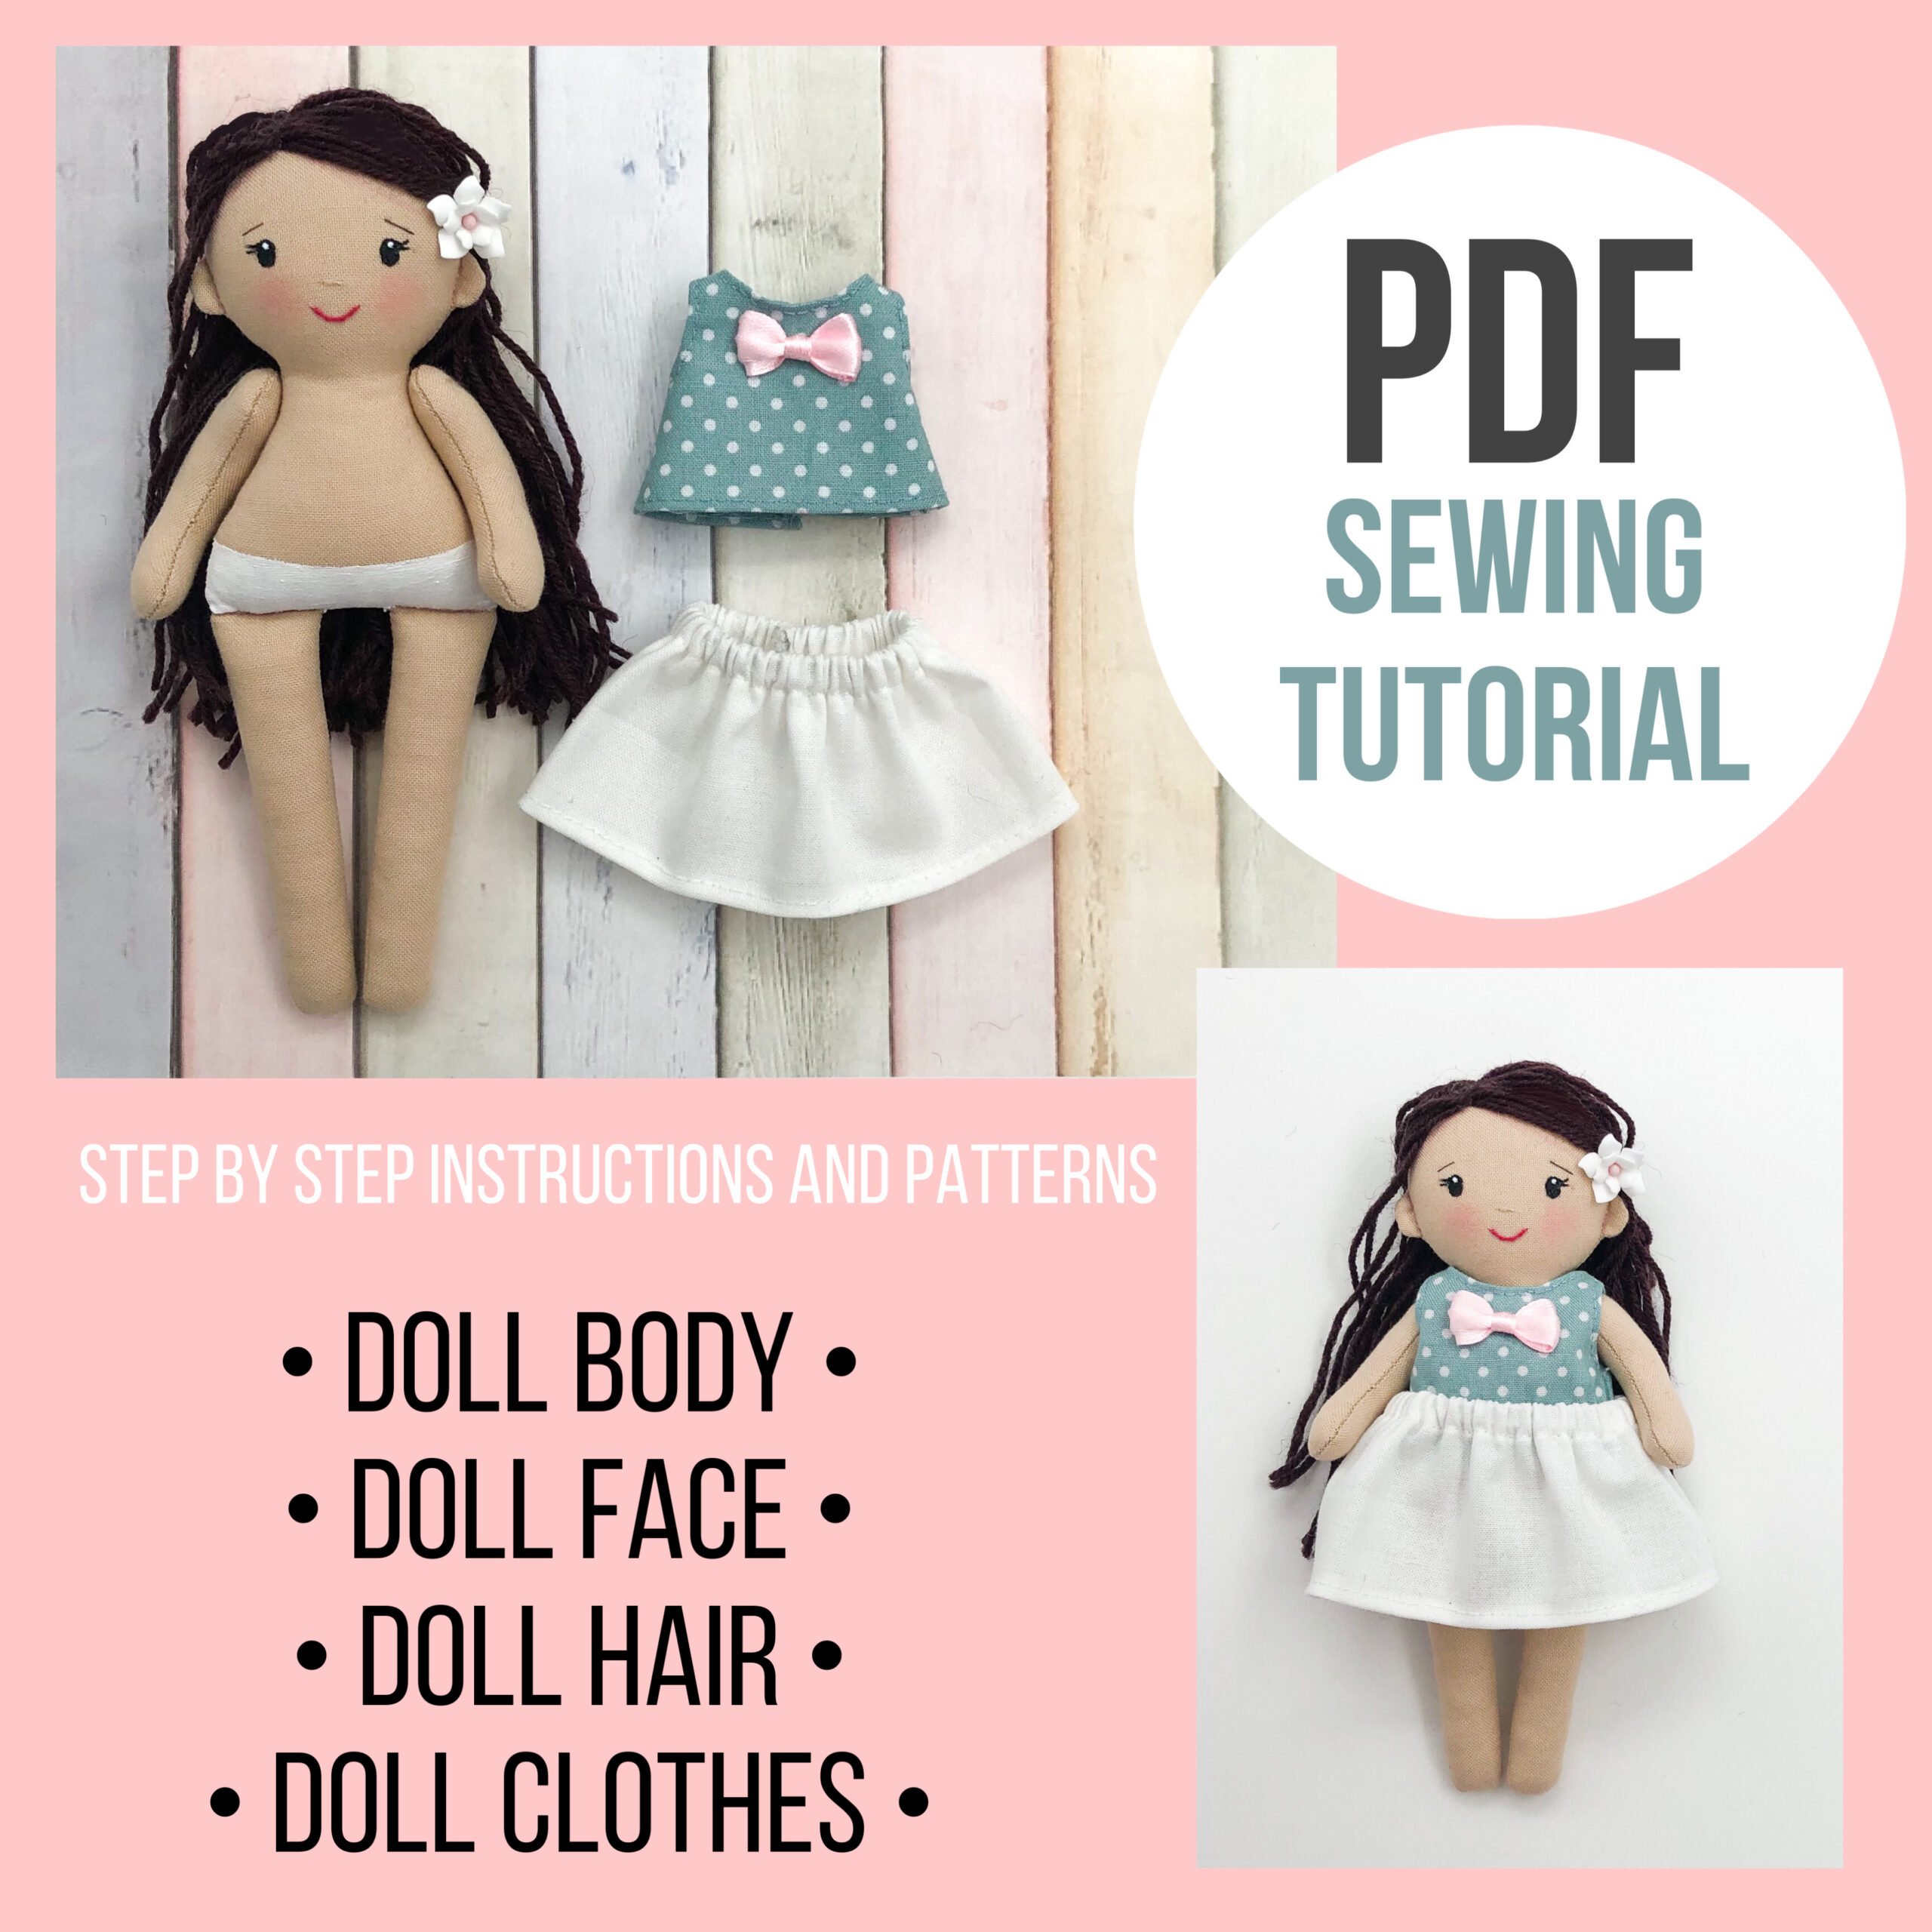 A great set of Barbie clothes sewing patterns for beginners: Sewing